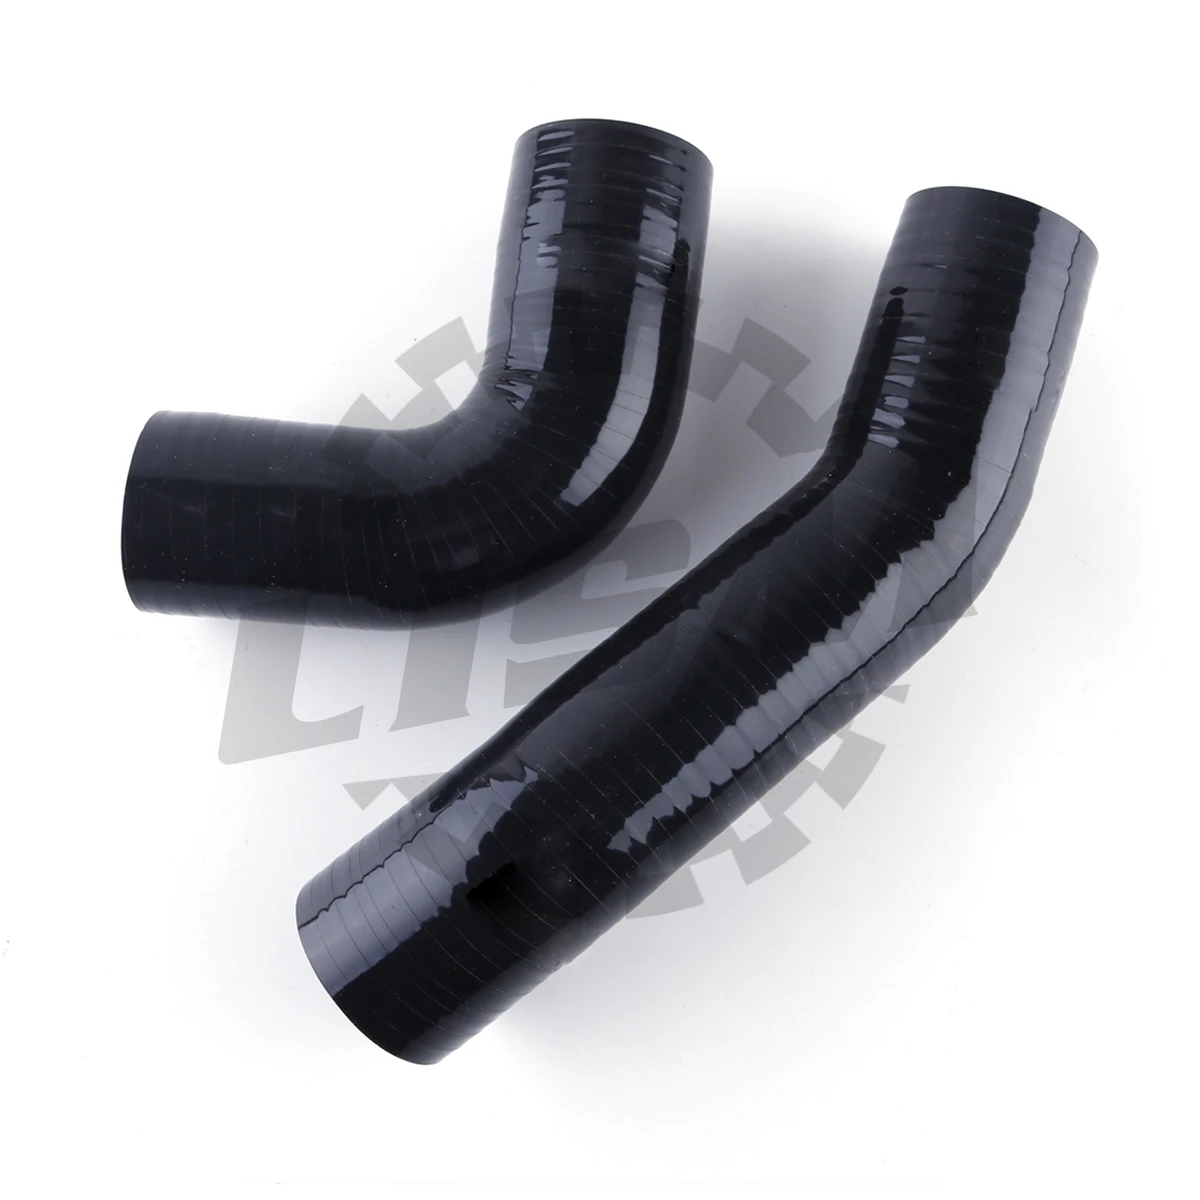 

4-ply For JAGUAR X-TYPE 2.0 2.2D EGR MAP to Intercooler Silicone Hoses Kit C2S26988 C2S26986 TURBO SILICONE PIPE Tube Hose